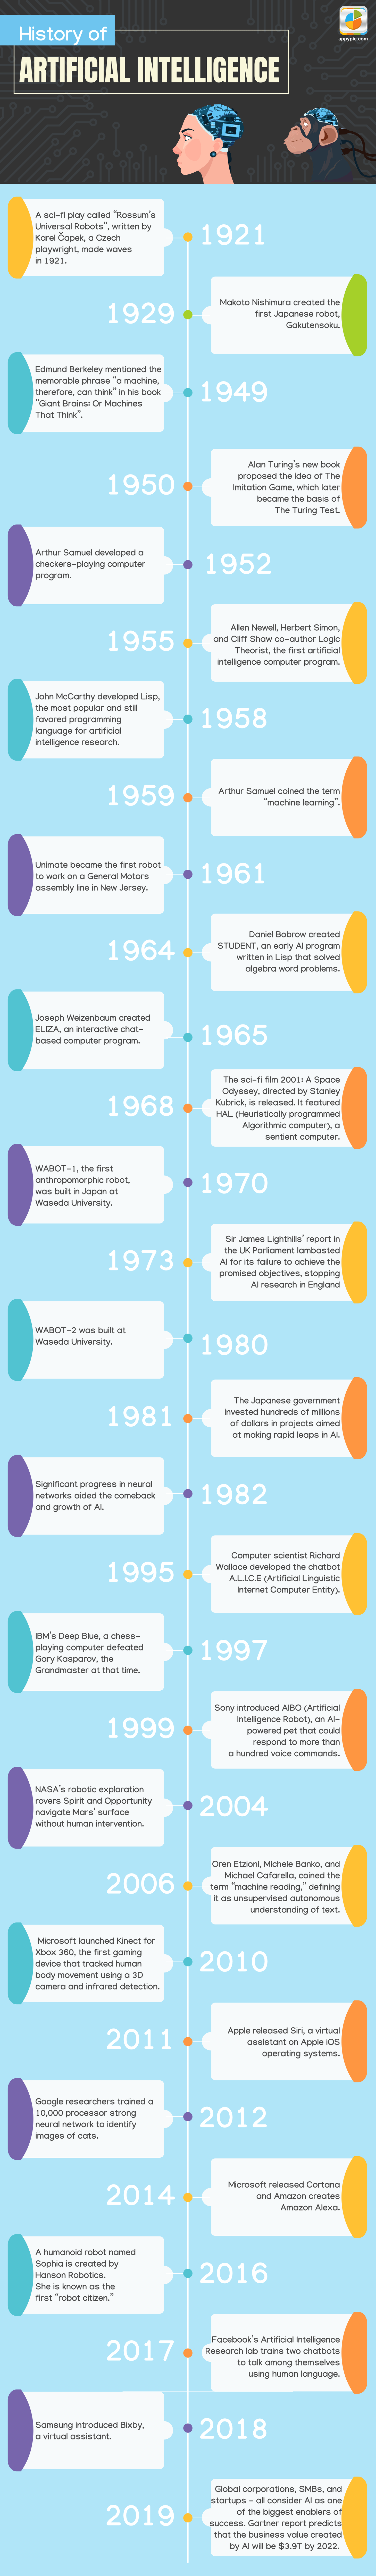 History of Artificial Intelligence by Appypie.com